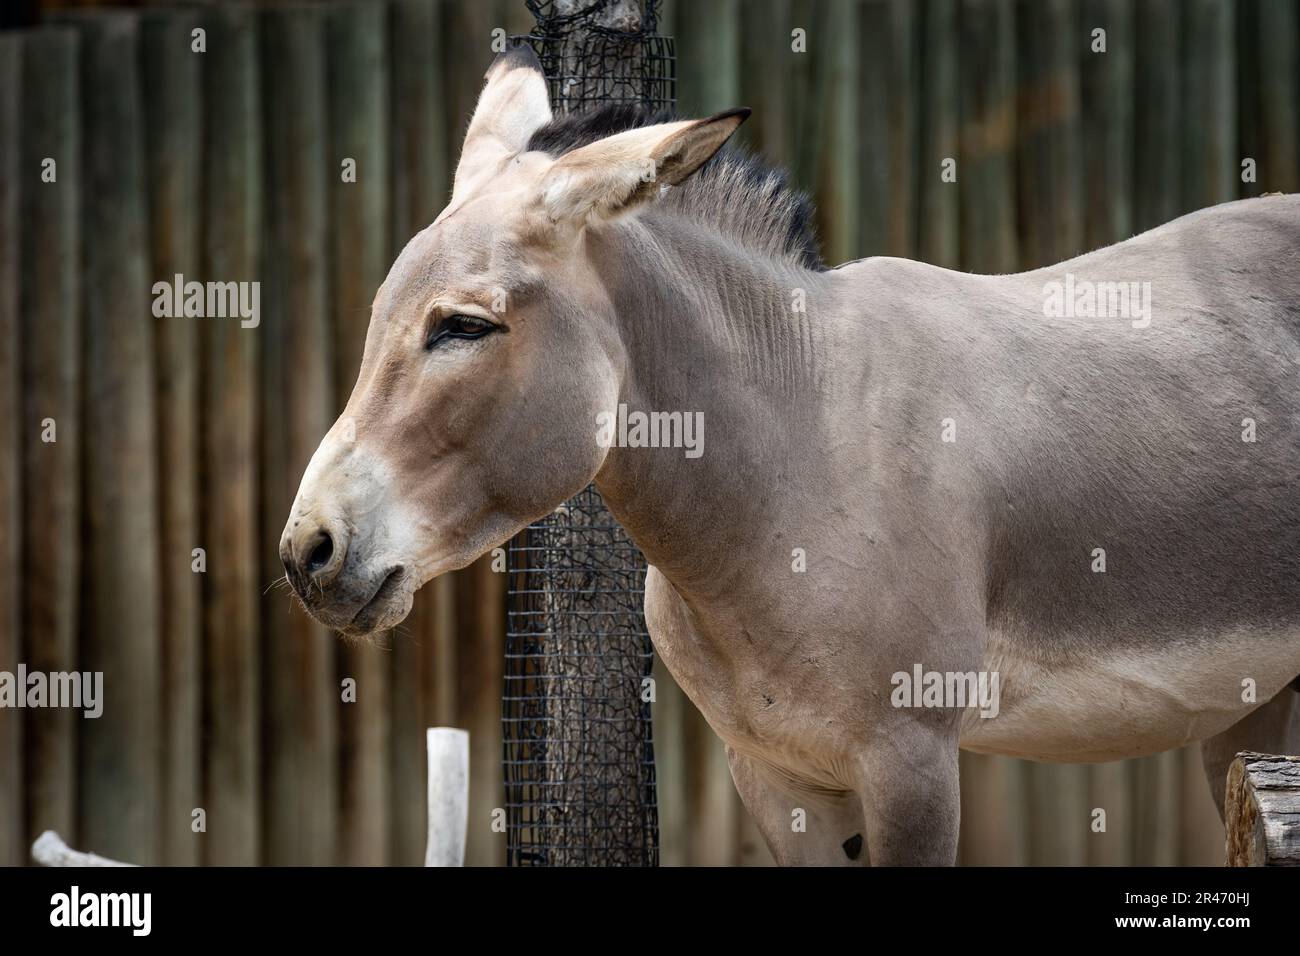 A Somali wild donkey (Equus africanus somaliensis) in front of a fence Stock Photo